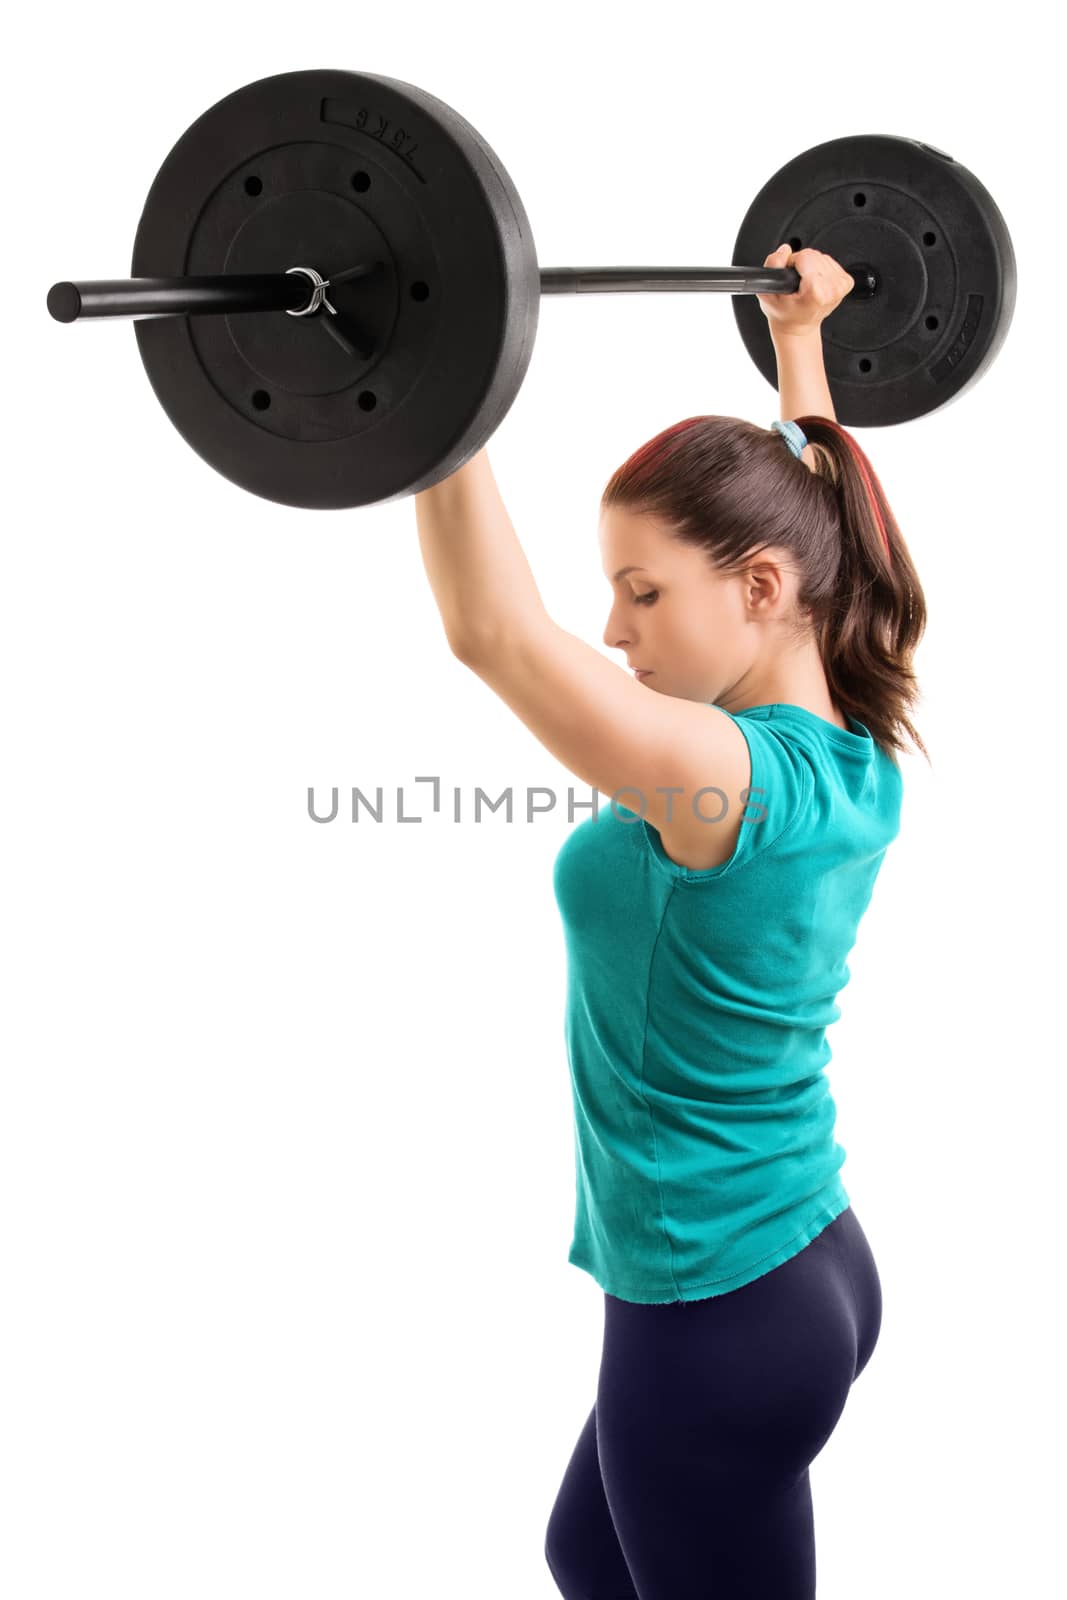 And hold! Young girl athlete holding a barbell up, isolated on white background.